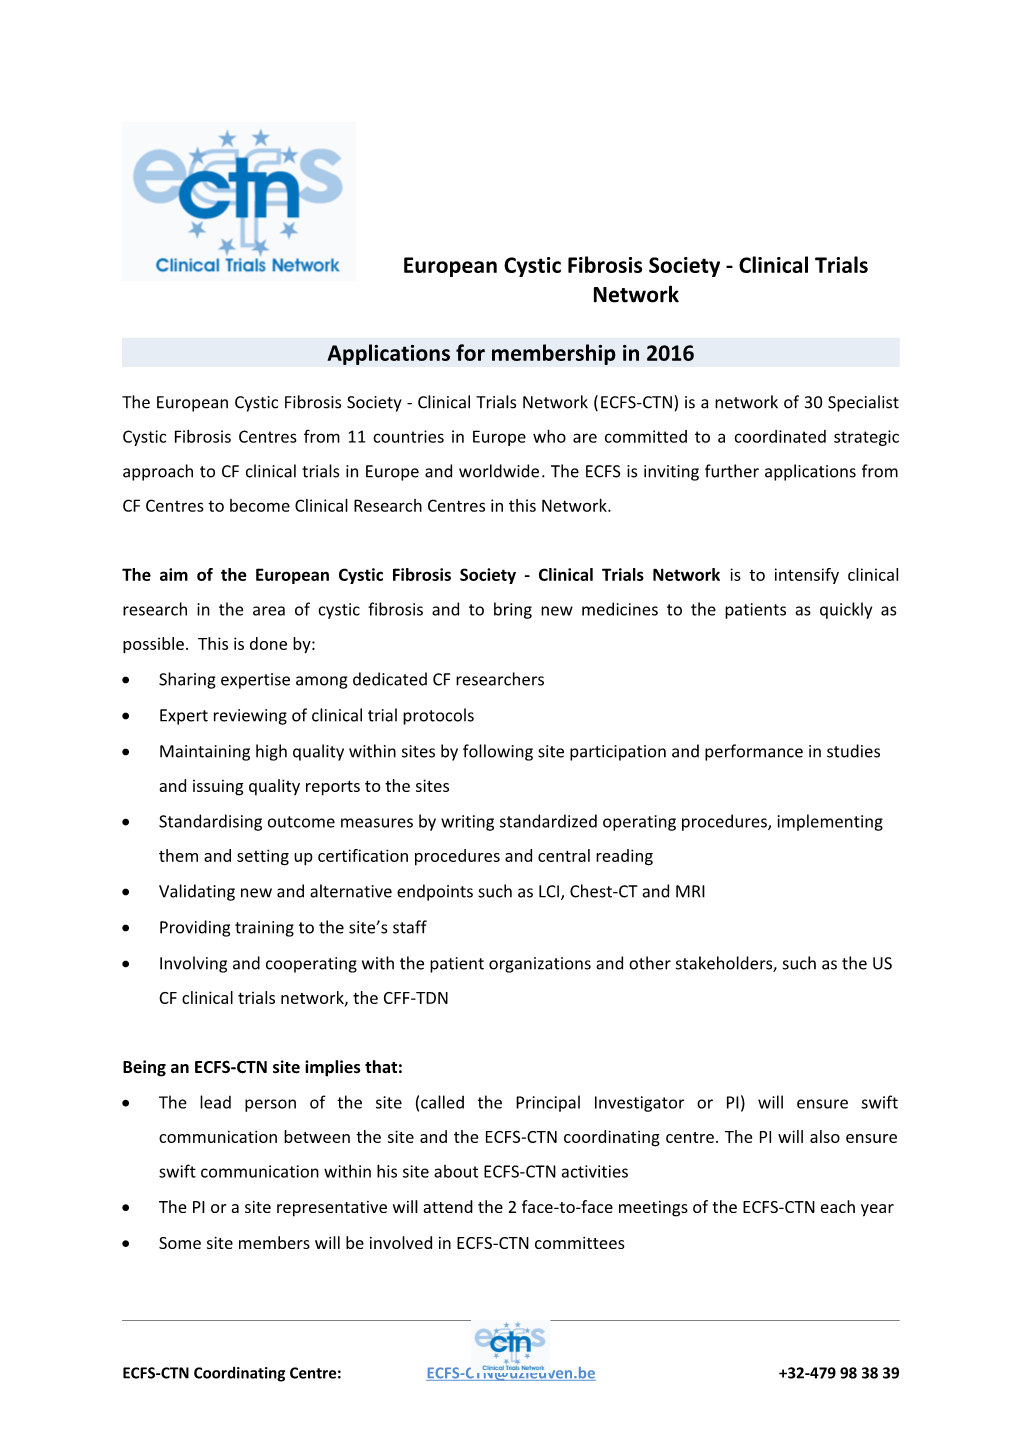 European Cystic Fibrosis Society - Clinical Trials Network